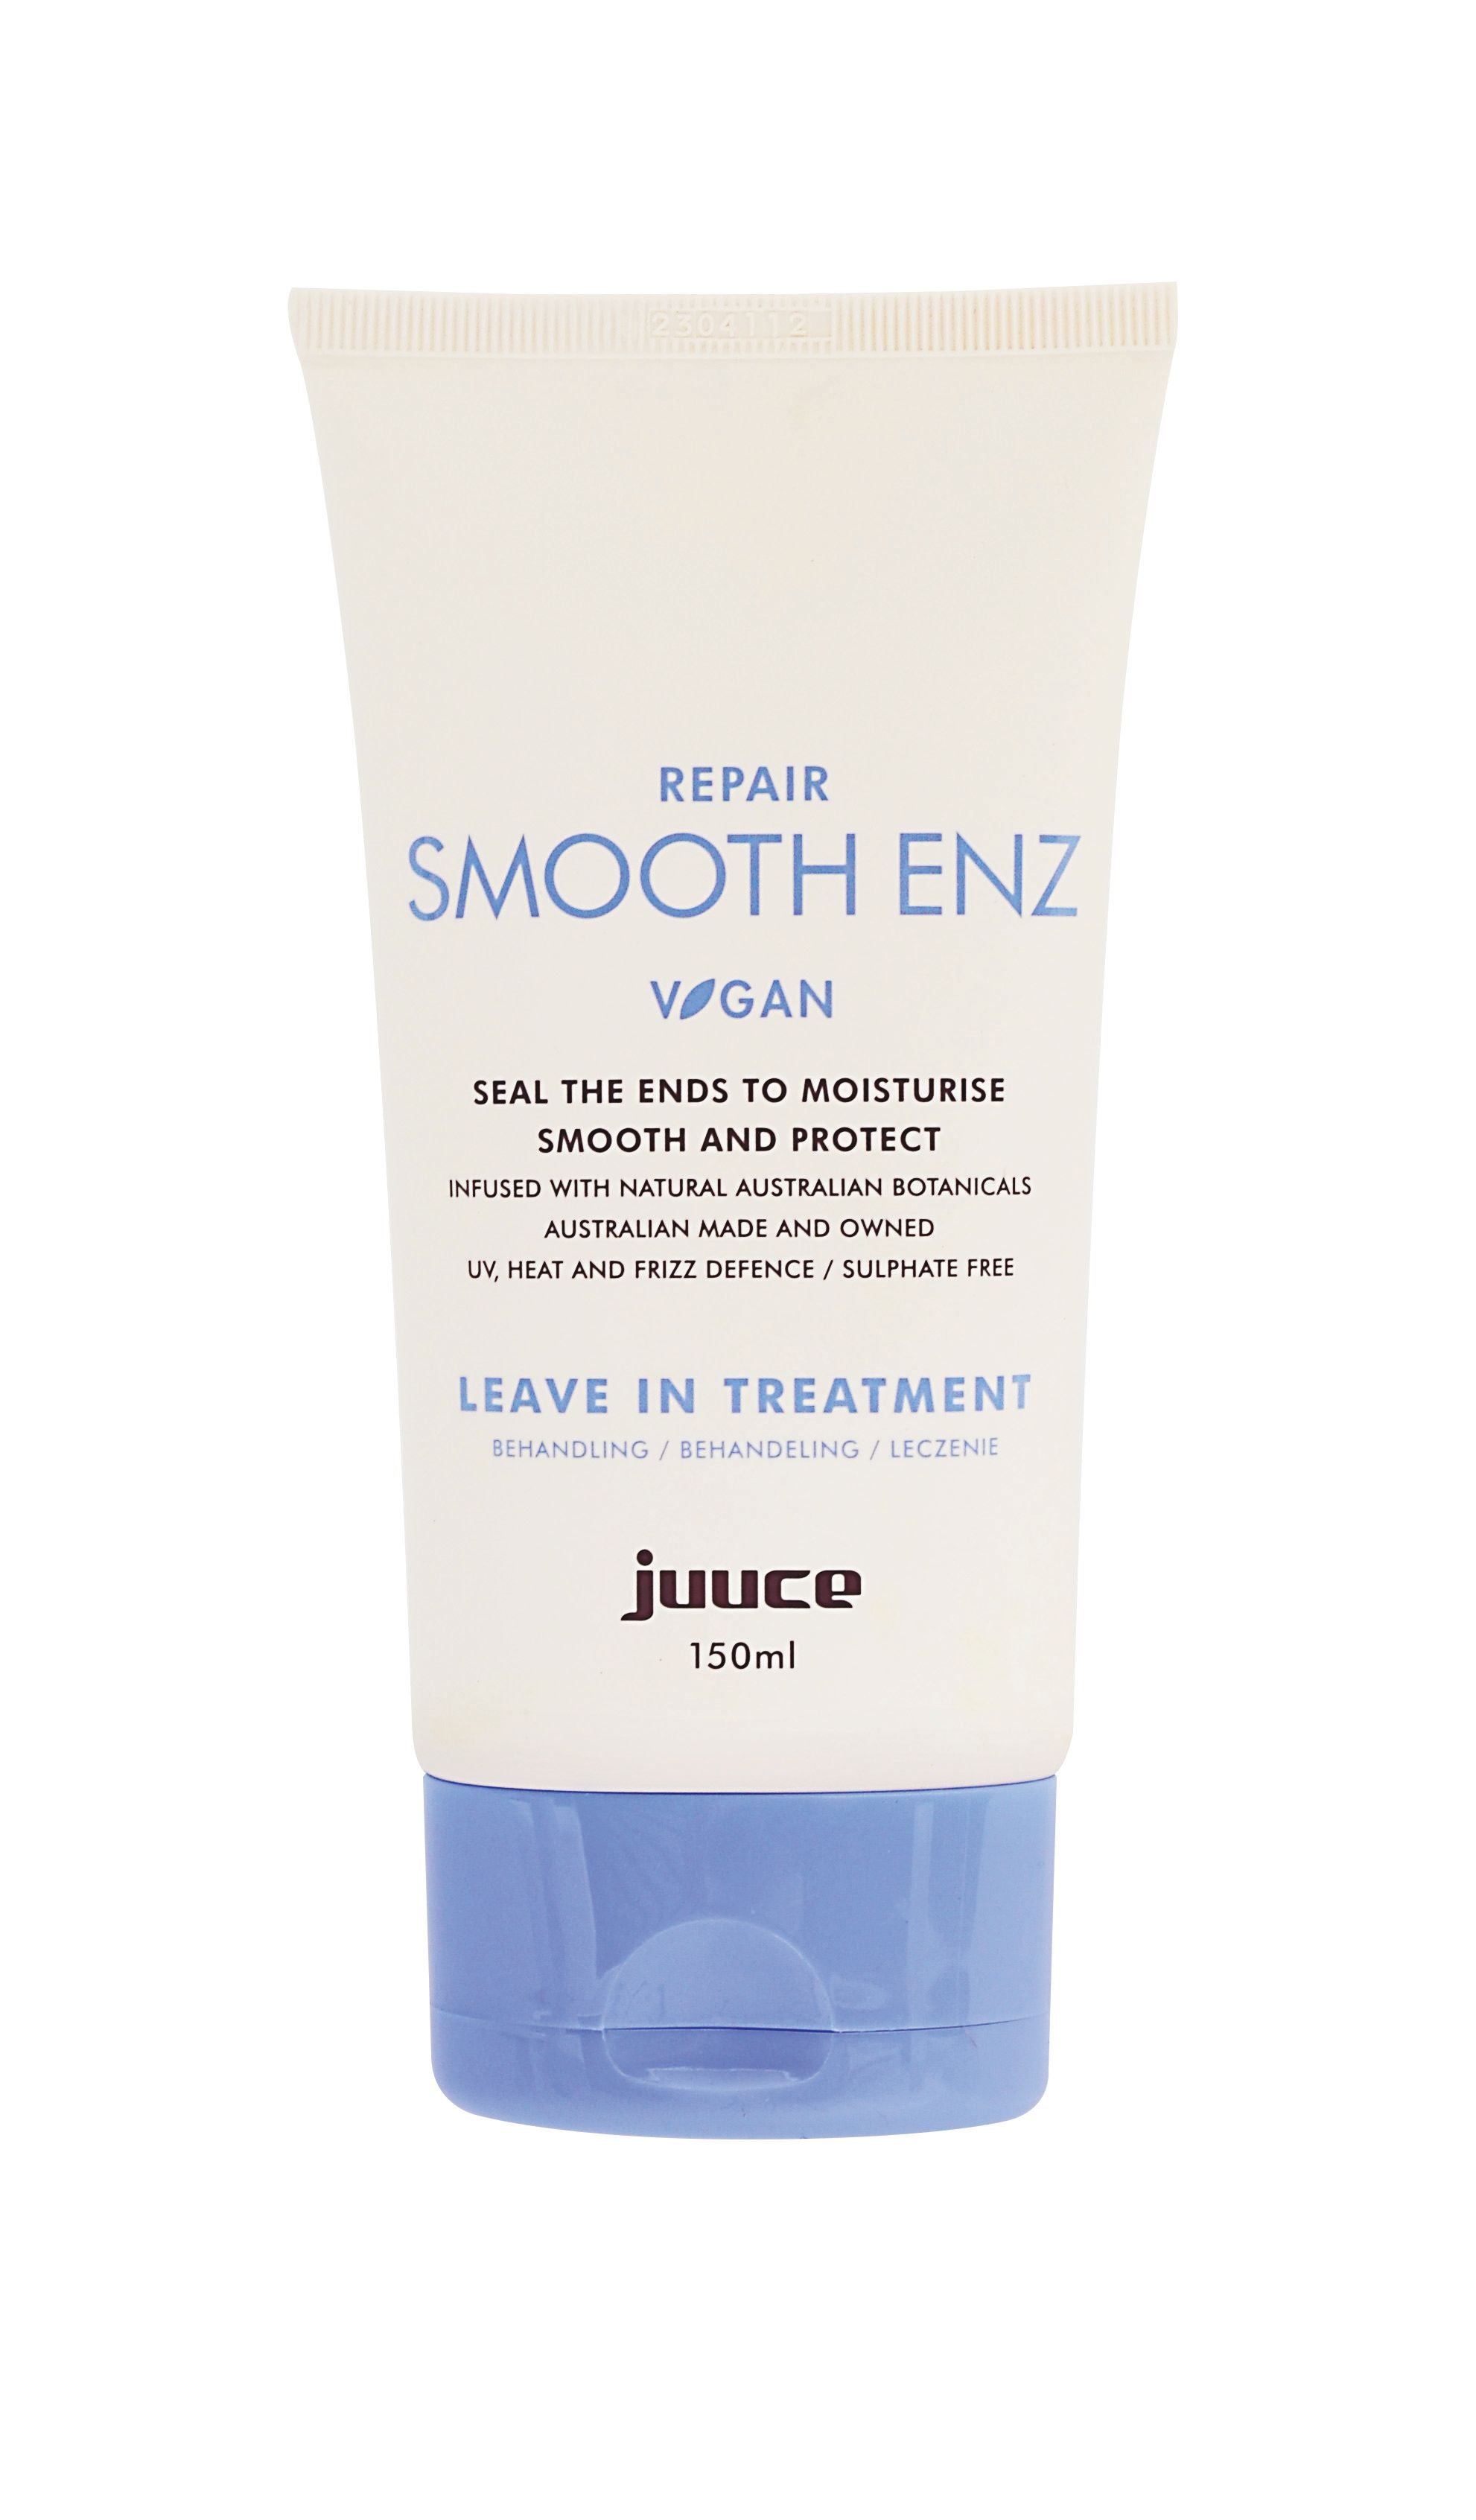 Juuce Smooth enz seal the ends to moisturise Smooth Protect 150 ml x 1 Juuce Styling - On Line Hair Depot